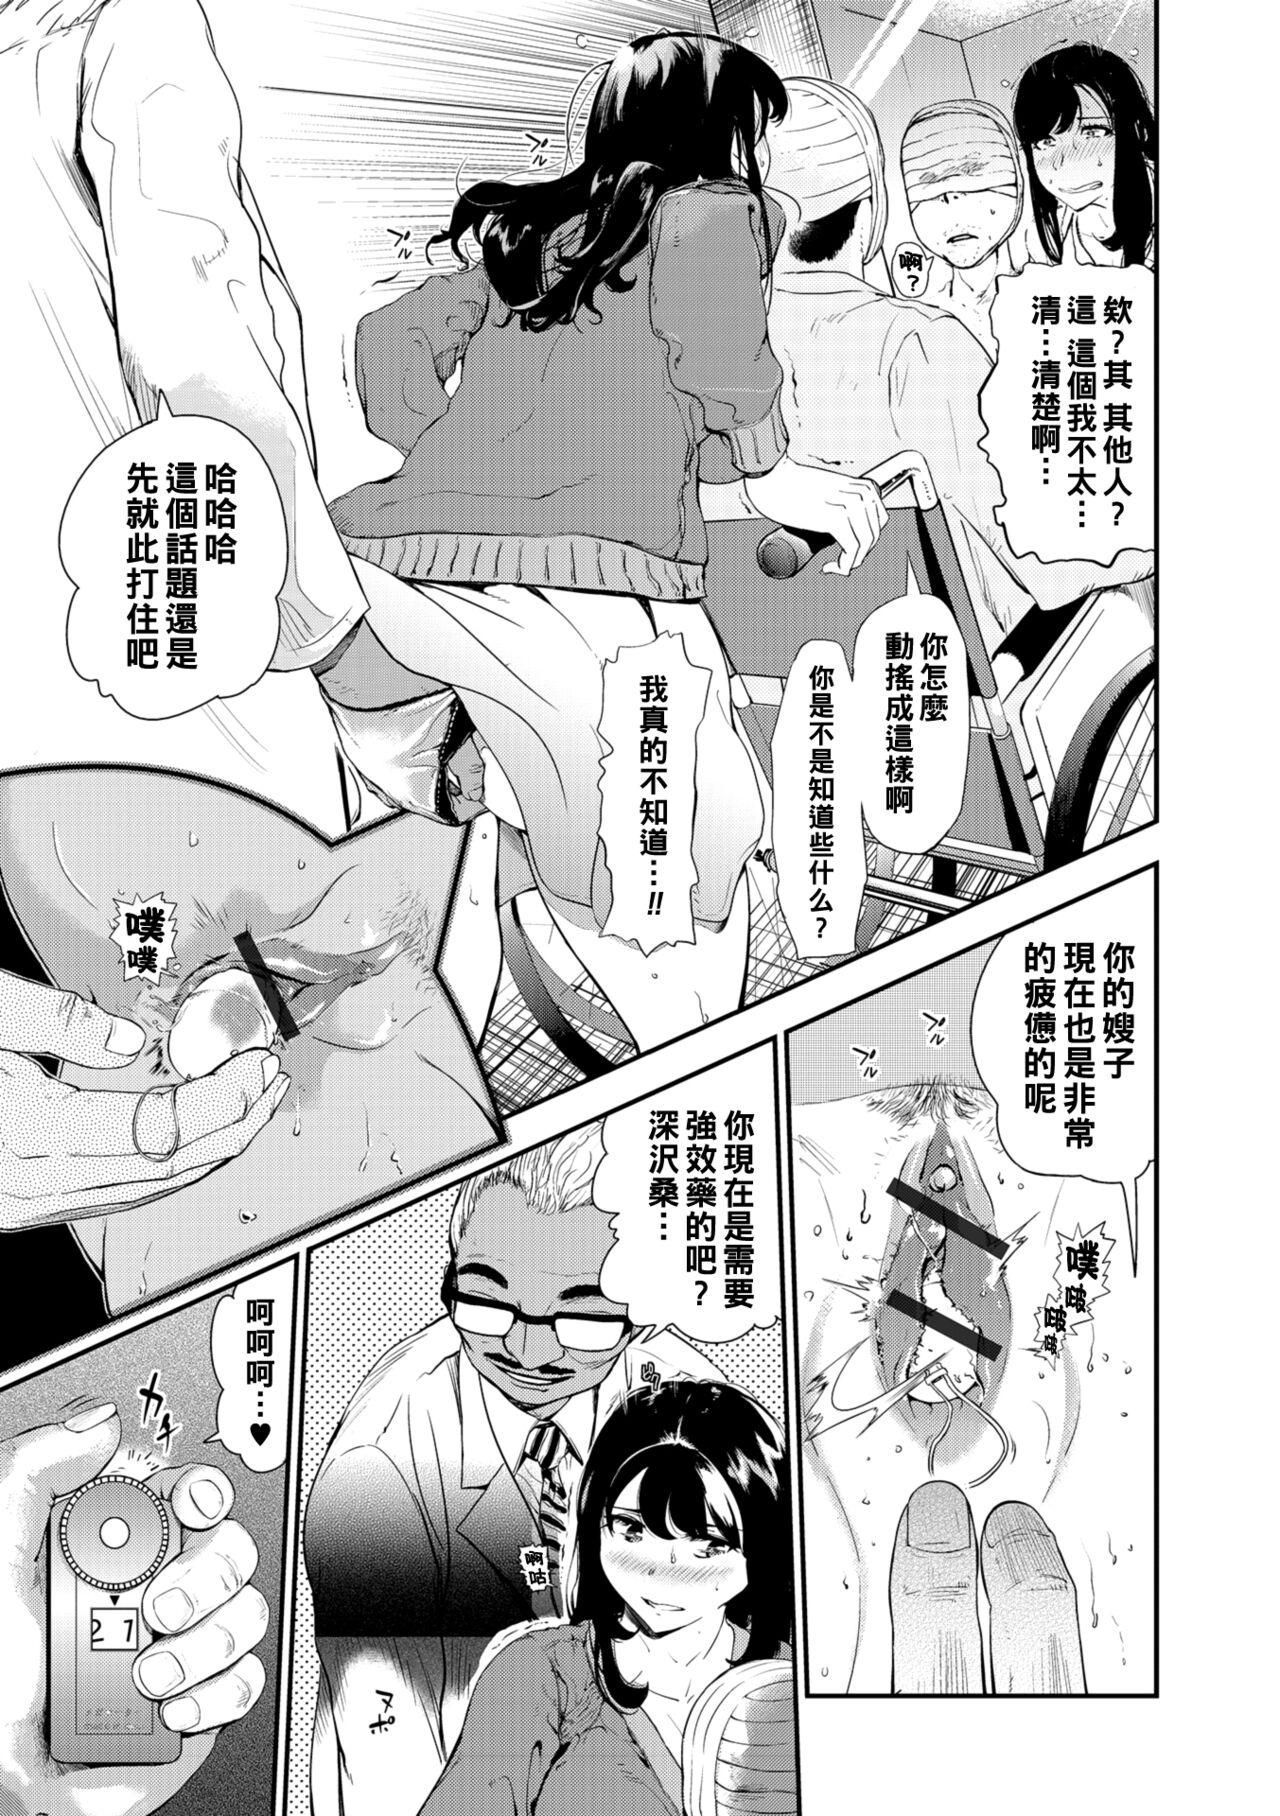 Nasty [プリ坊] 兄嫁の媚穴 -The Lost Man- Hole 1-3（Chinese） Insertion - Page 5